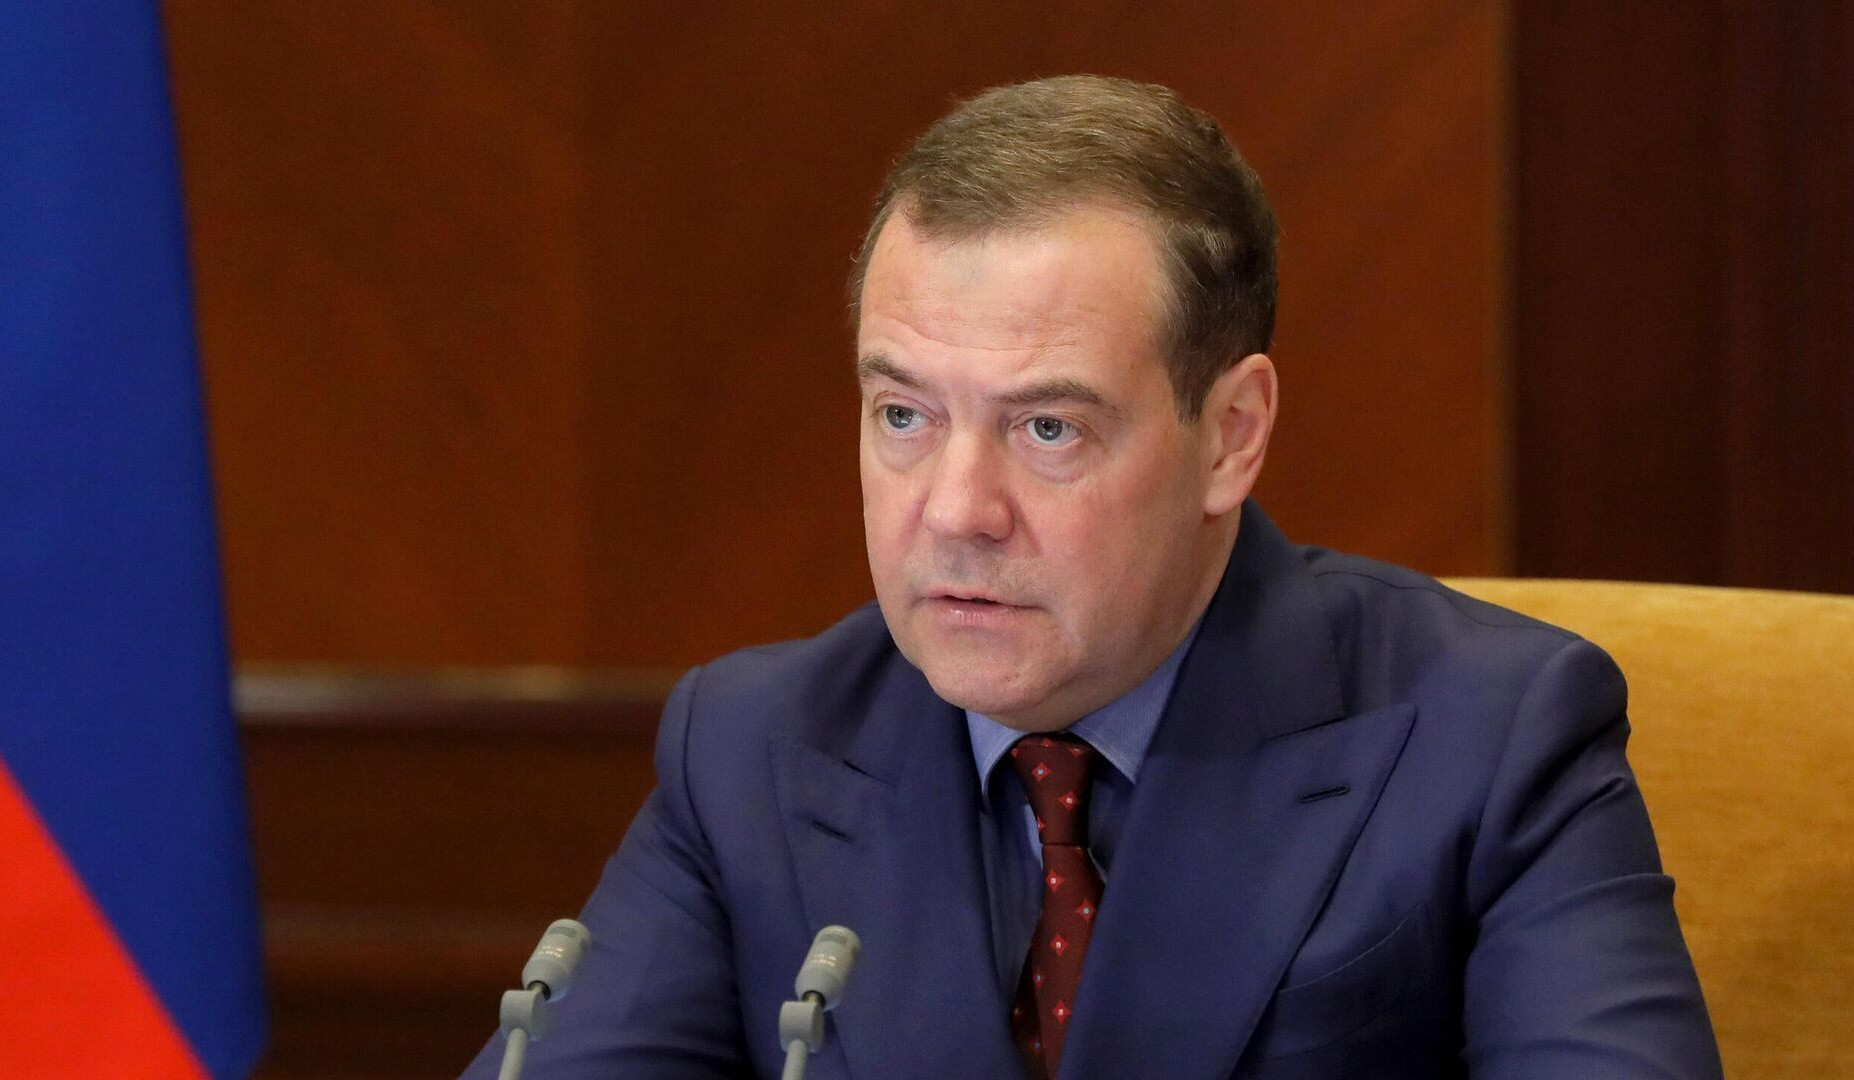 Russia's Medvedev: We will set terms for peace in Ukraine